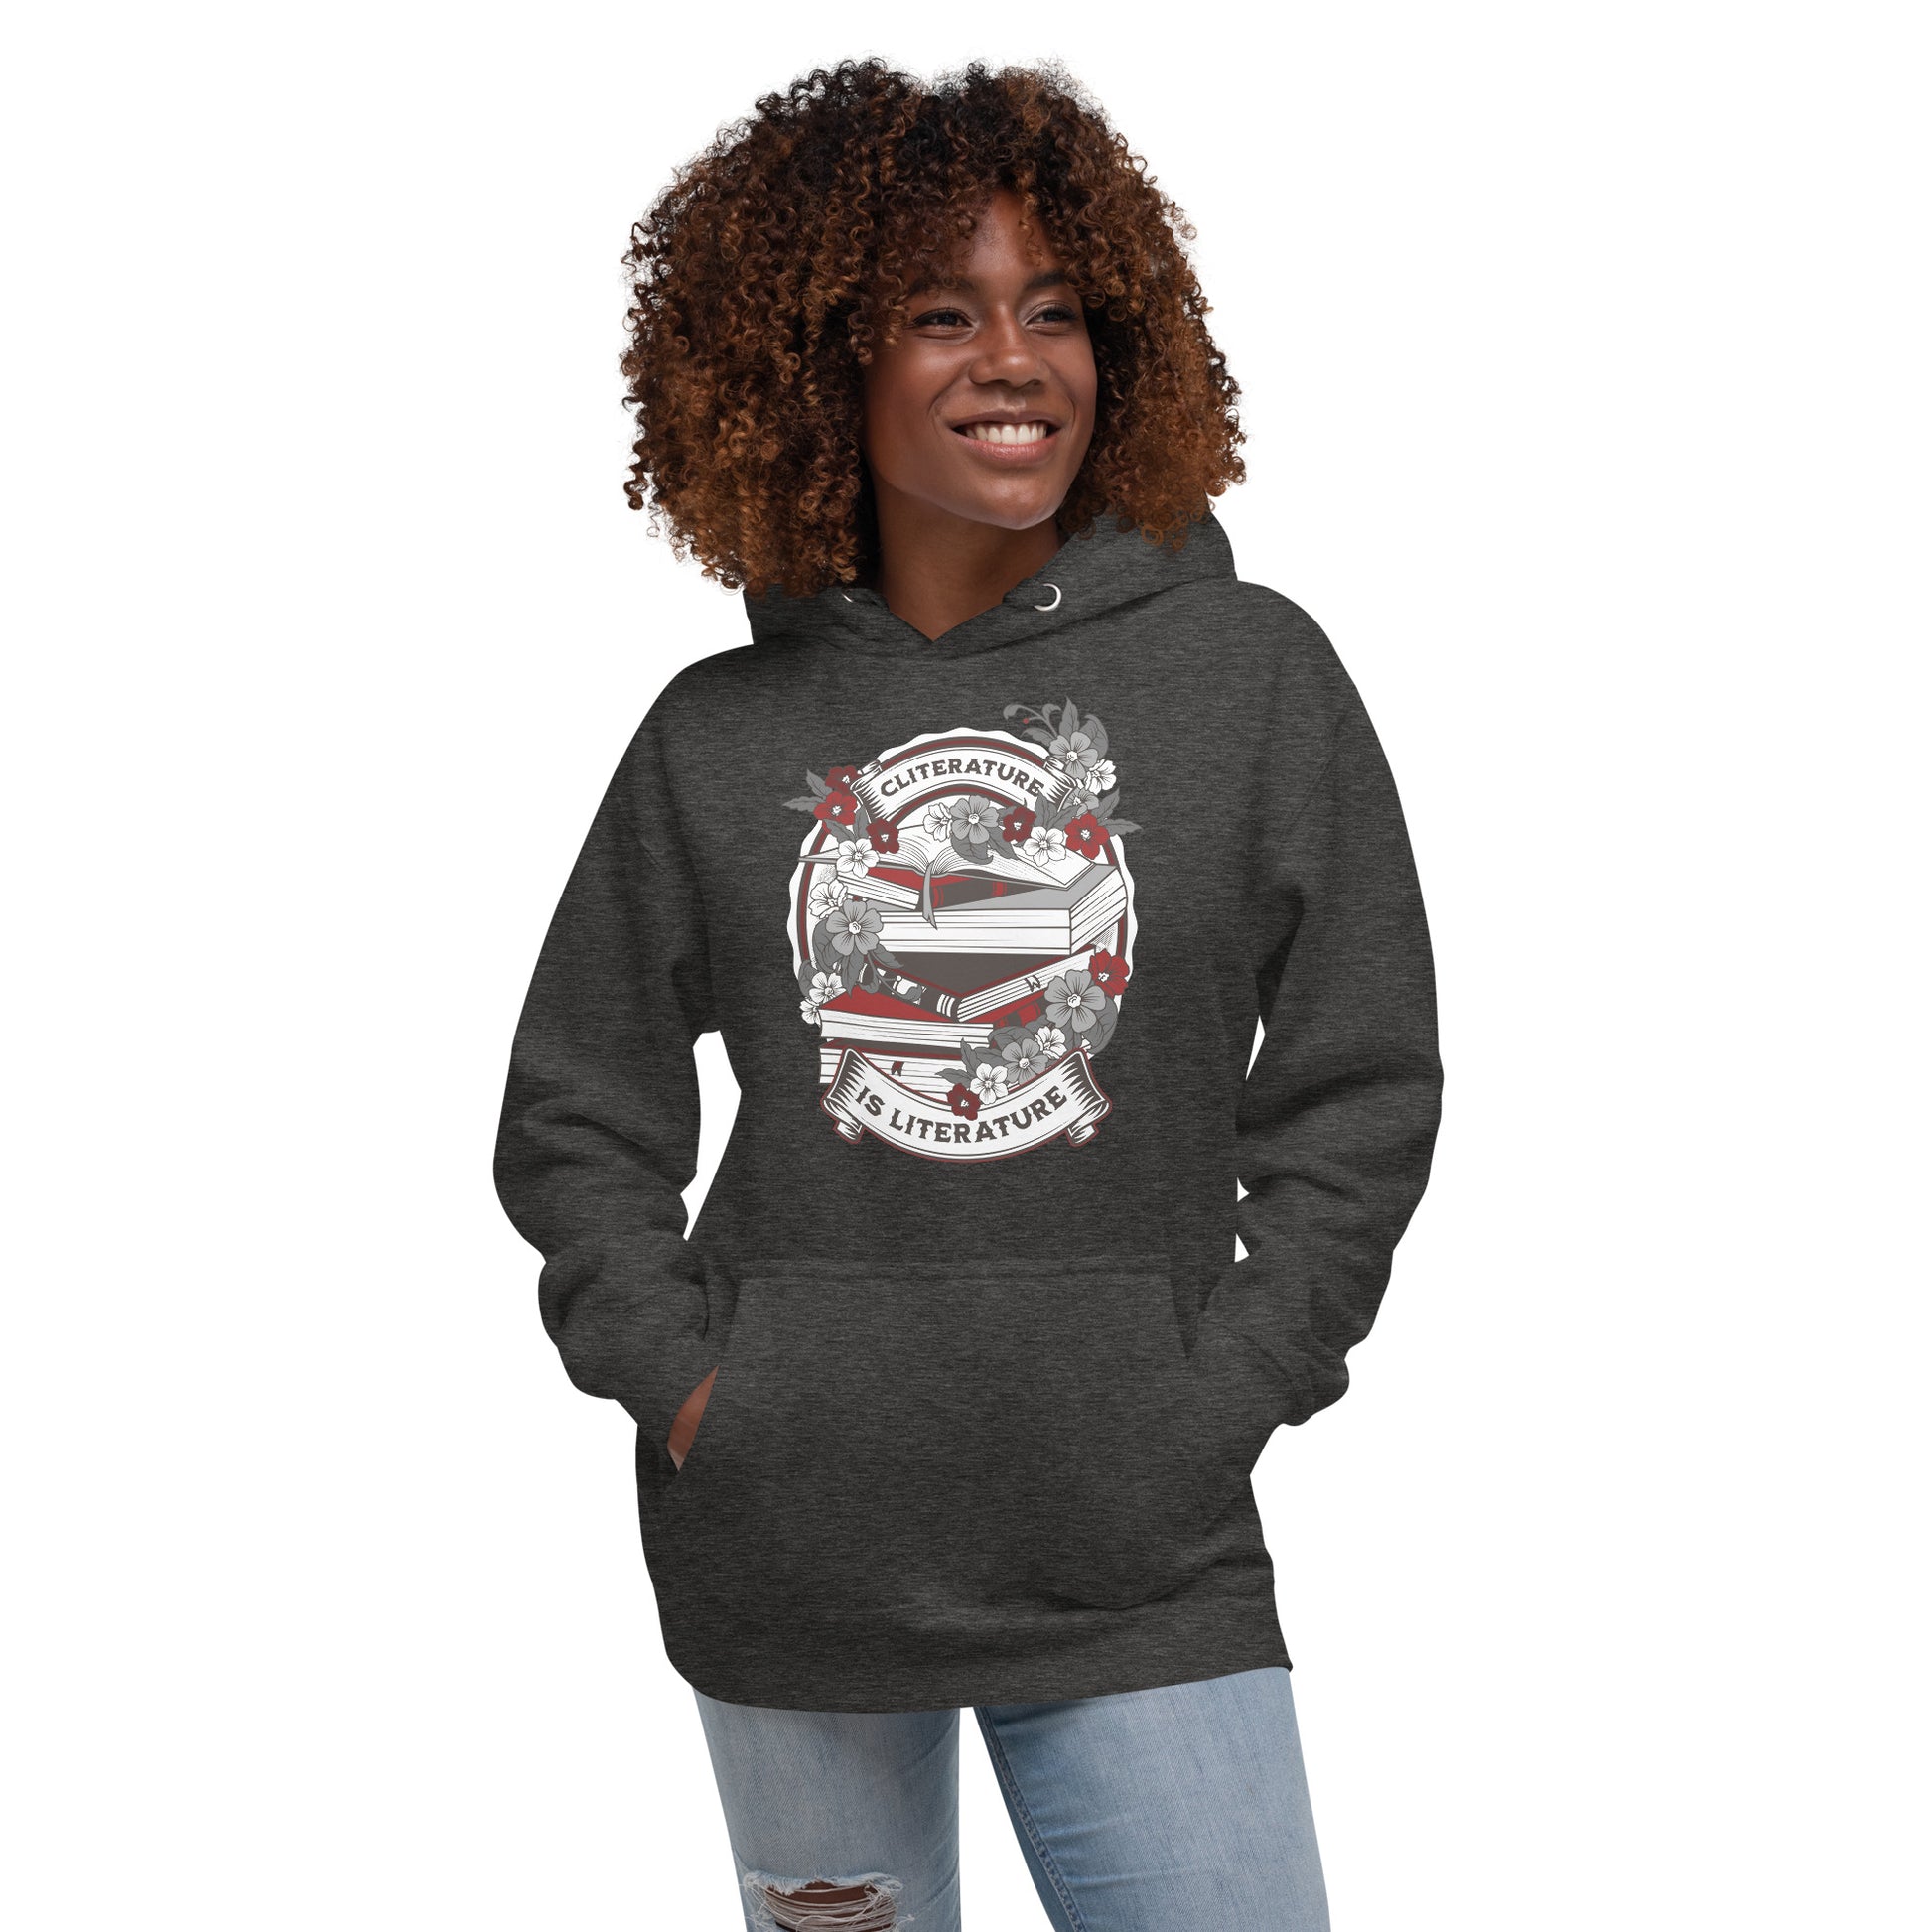 Cliterature is Literature Dark Bookstack Unisex Hoodie *NEW BRAND - CHECK SIZING* for FireDrake Artistry